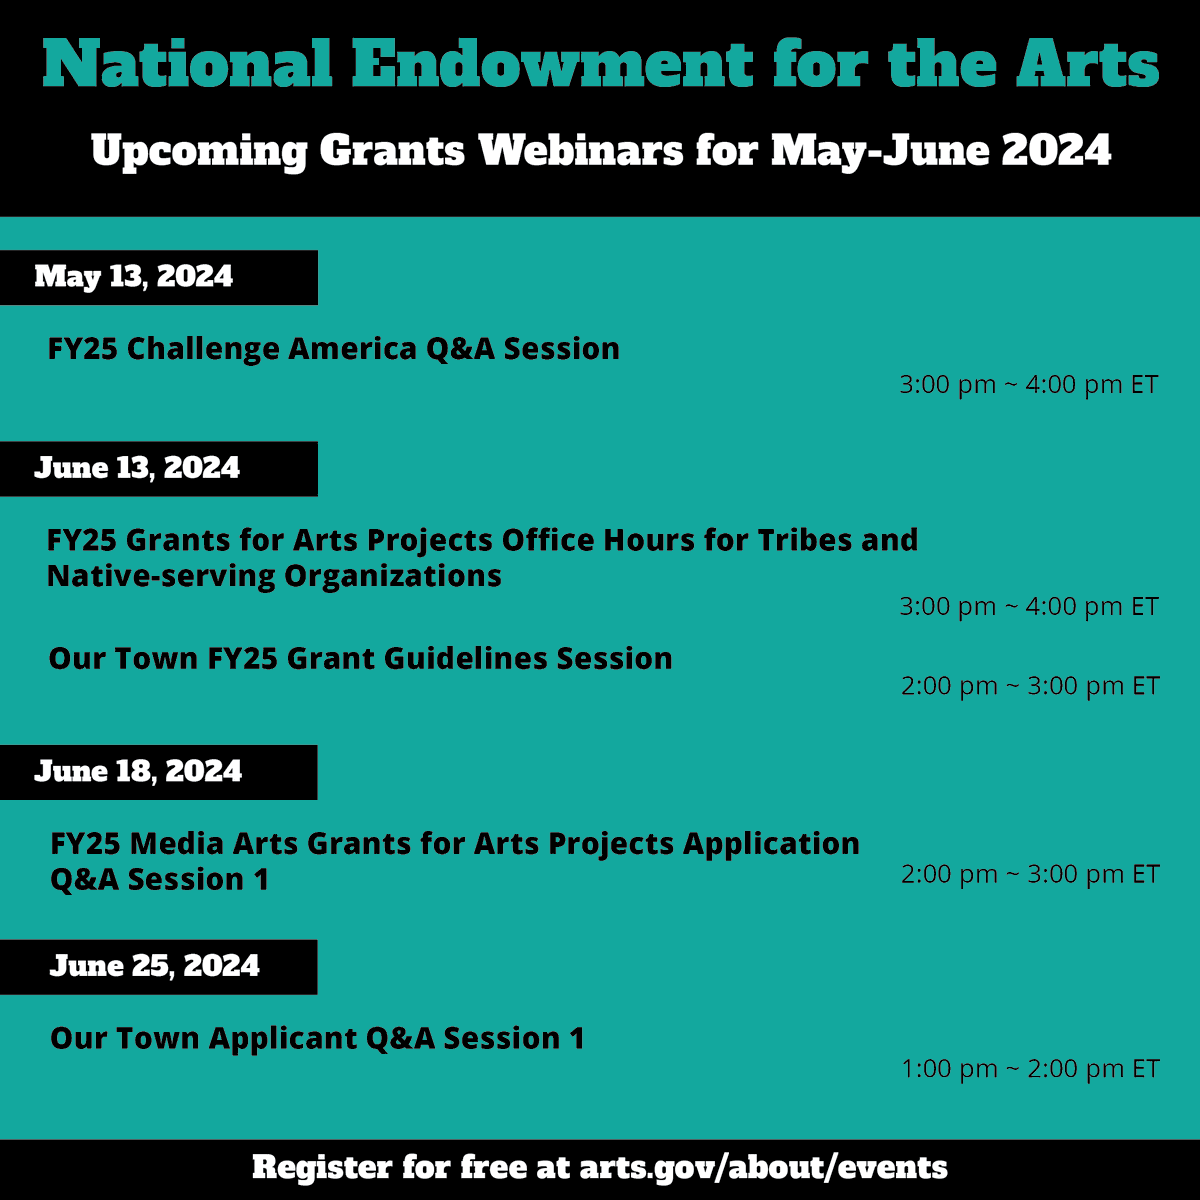 Save the Date! Here are the upcoming grants webinars for May-June 2024 for Challenge America, GAP for Tribes and Native-serving Organizations, Our Town, and Media Arts. Visit arts.gov/events for more information and to register.